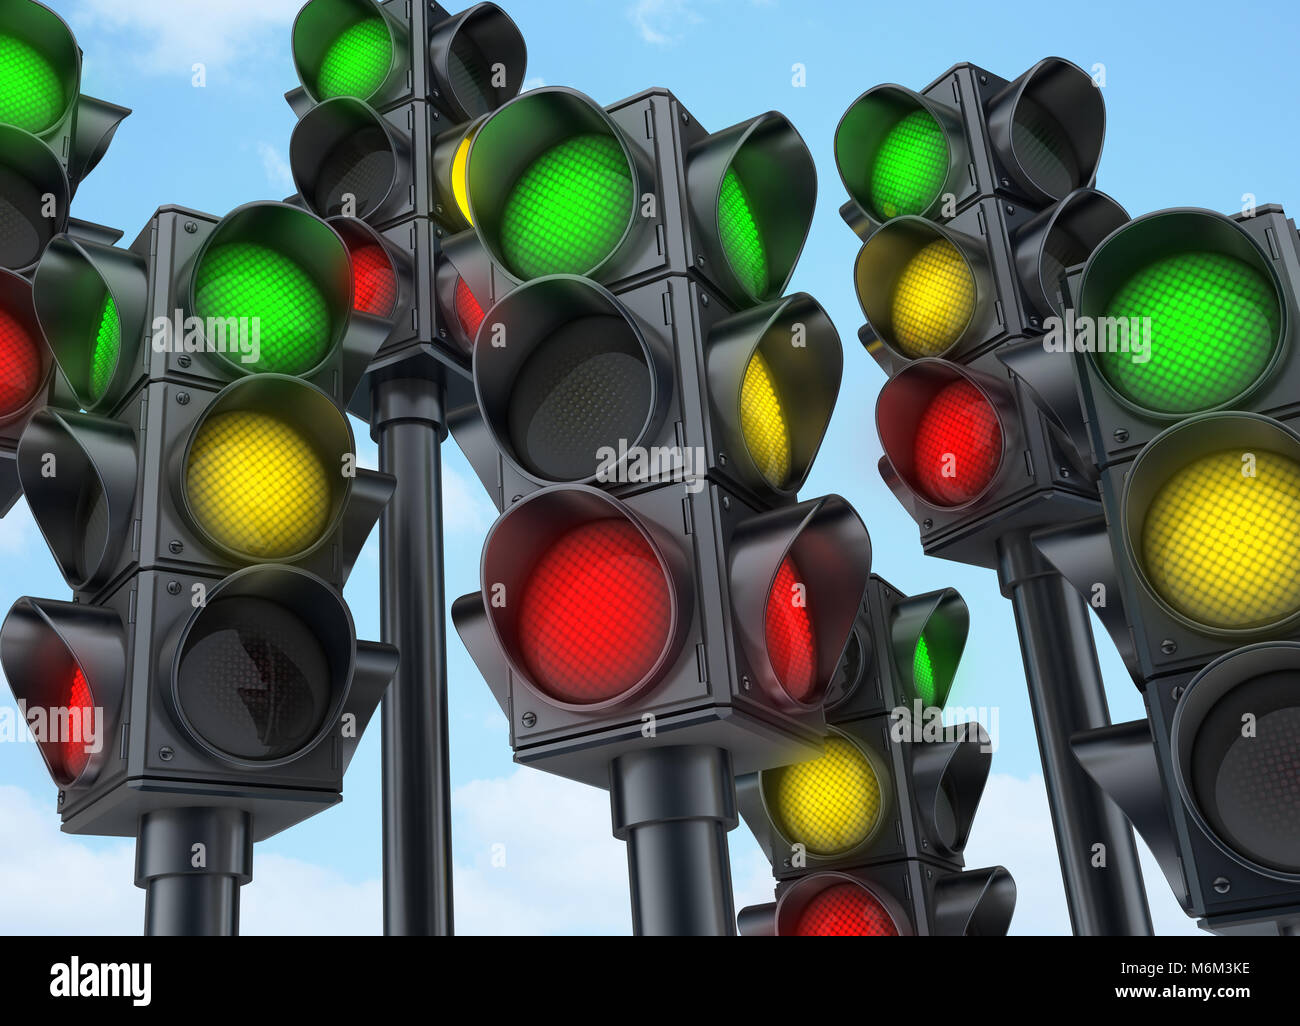 Many traffic lights green, yellow, red. 3d illustration Stock Photo